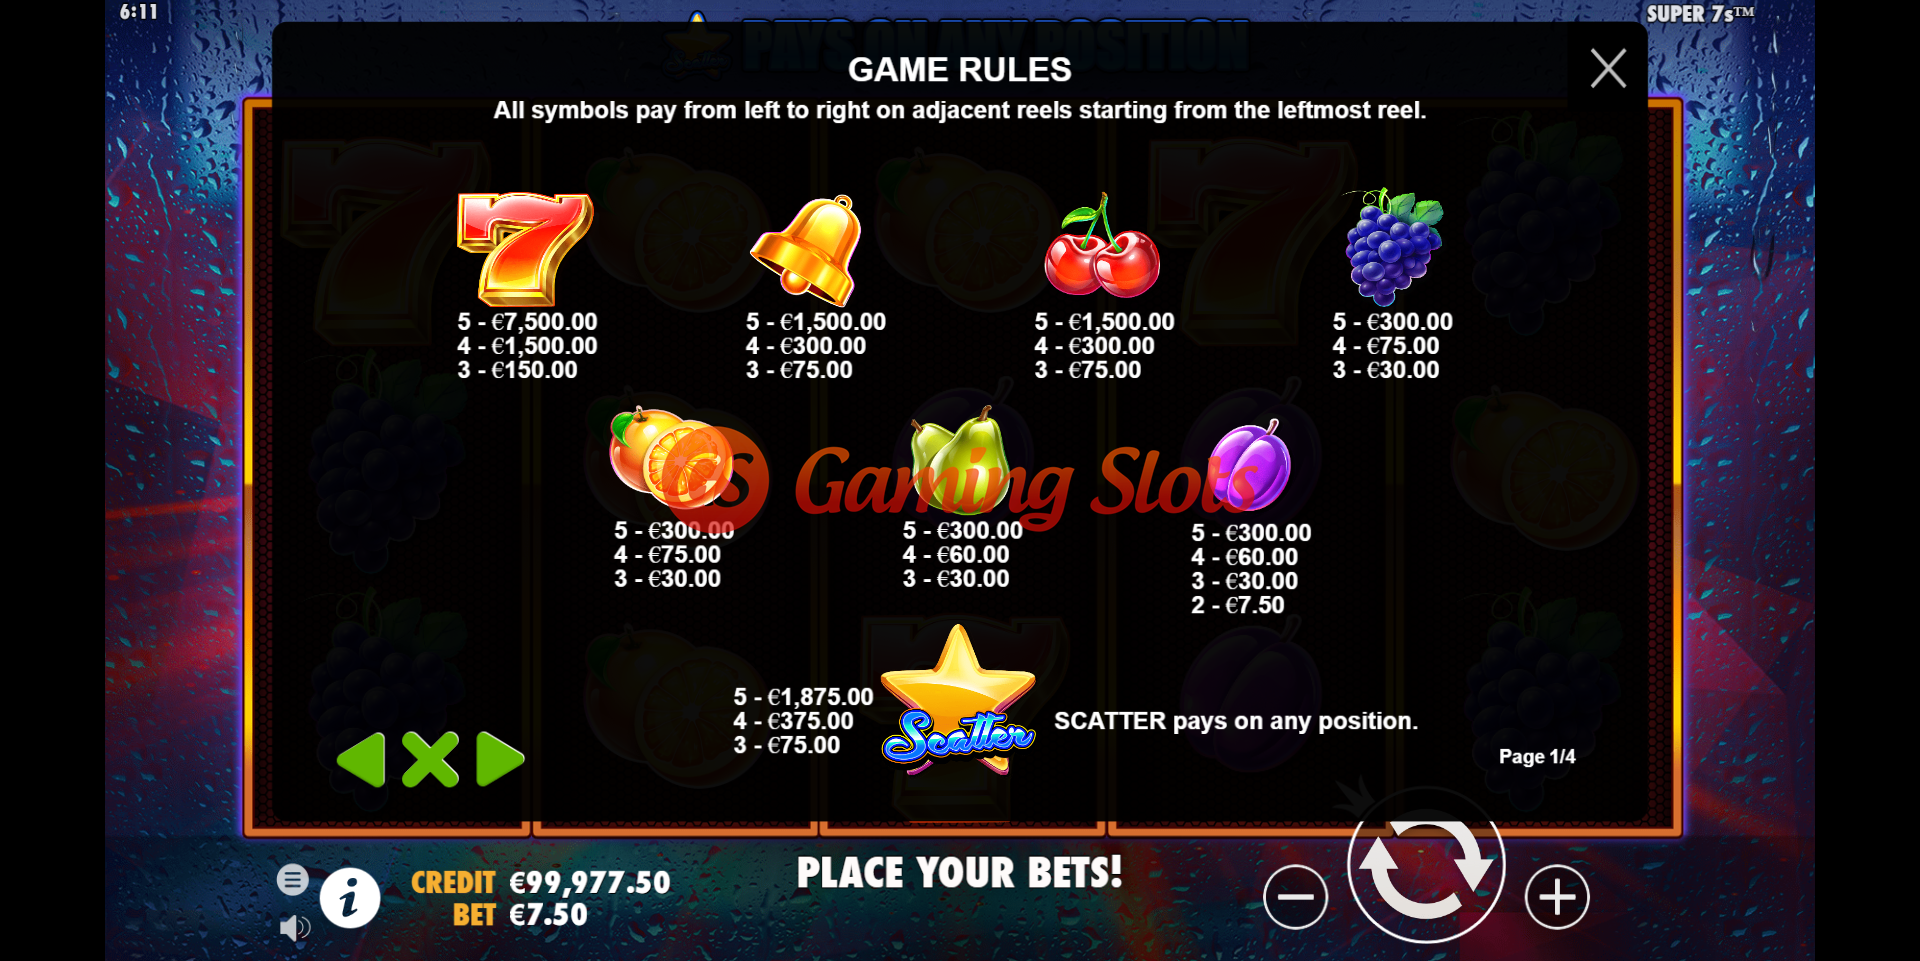 Game Rules for Super 7s slot from Pragmatic Play